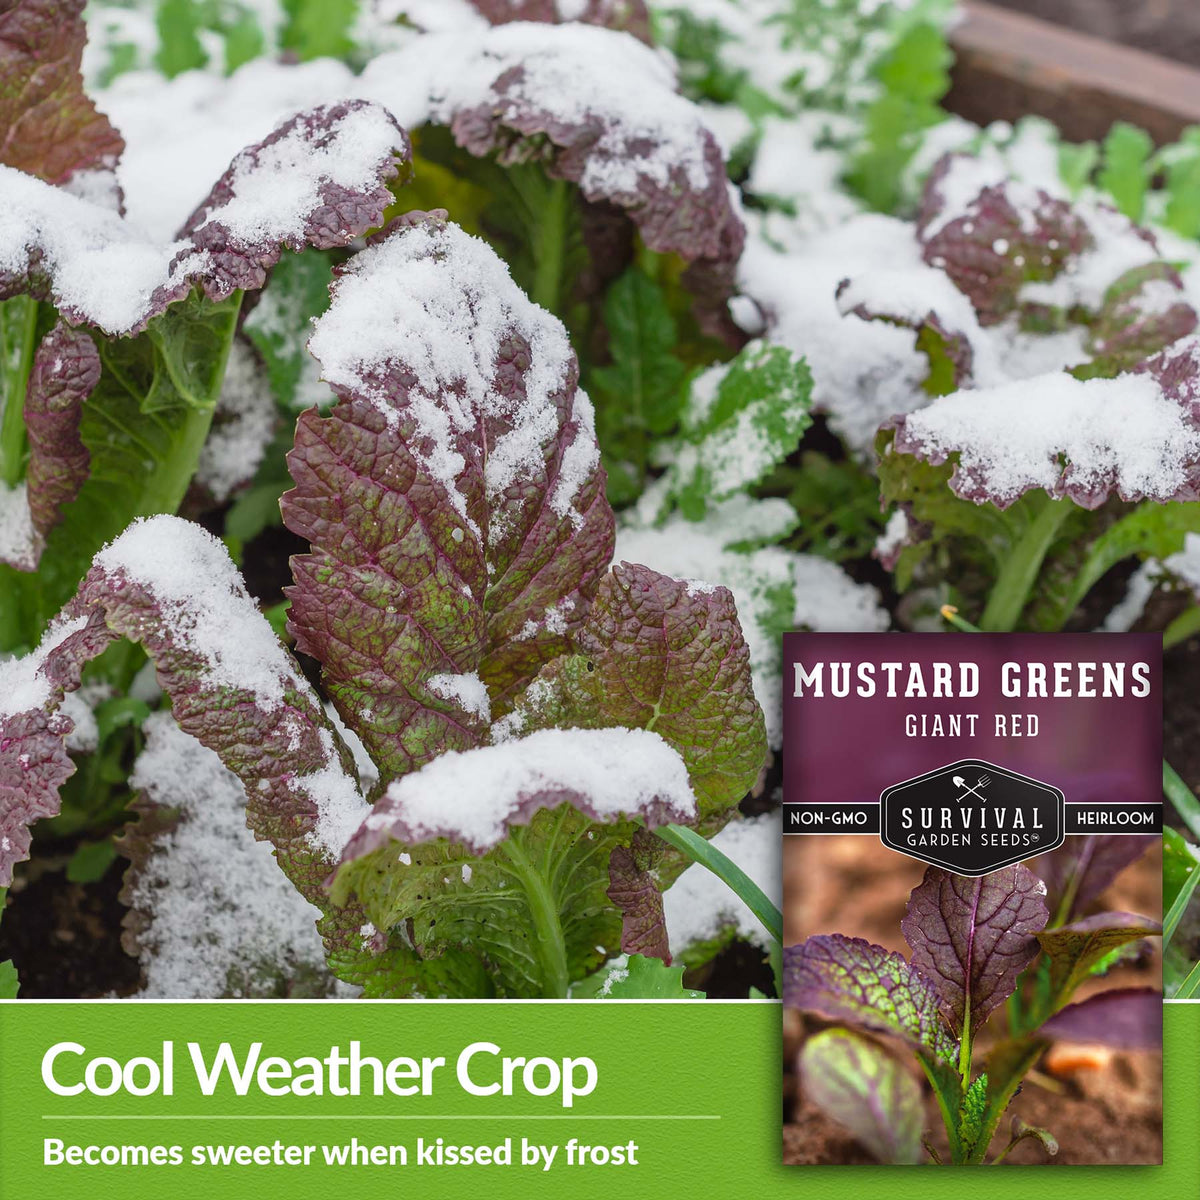 Giant Red Mustard Greens are a cool weather crop